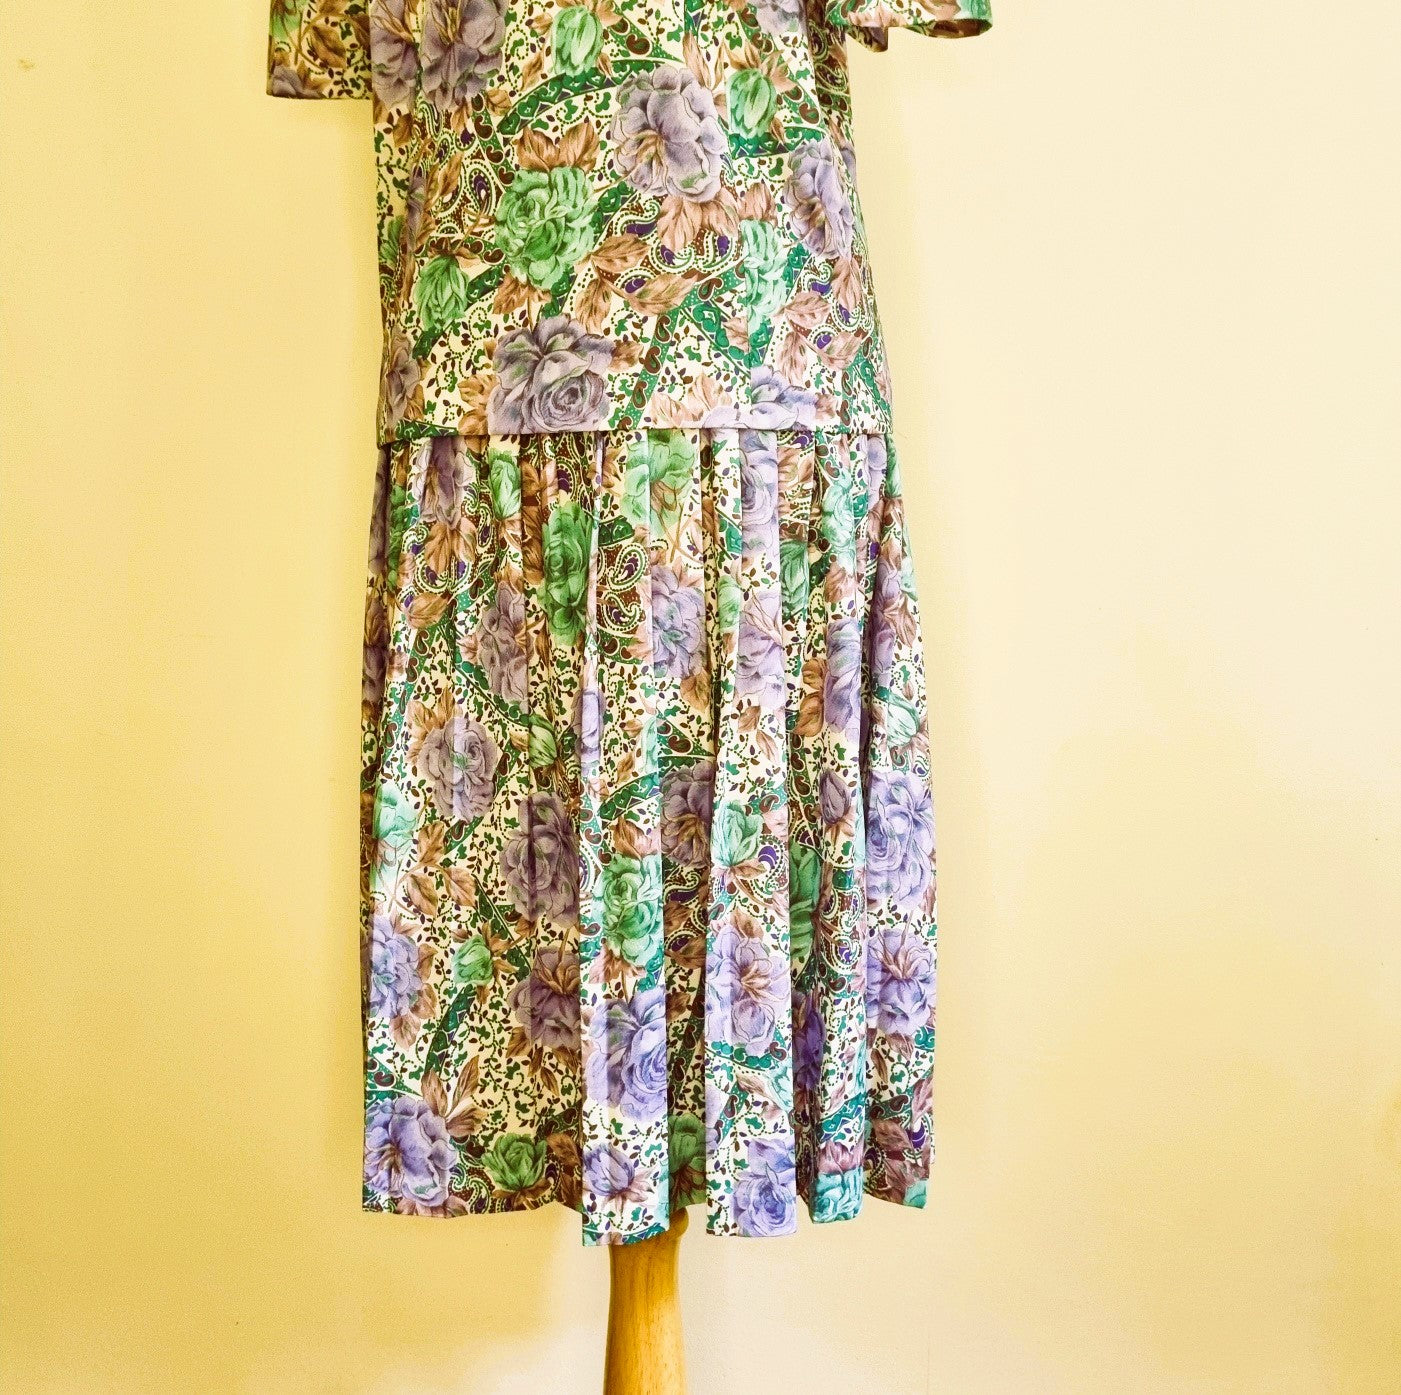 Nuvelle by Rosecraft - Vintage - Gorgeous purple & green top/skirt suit